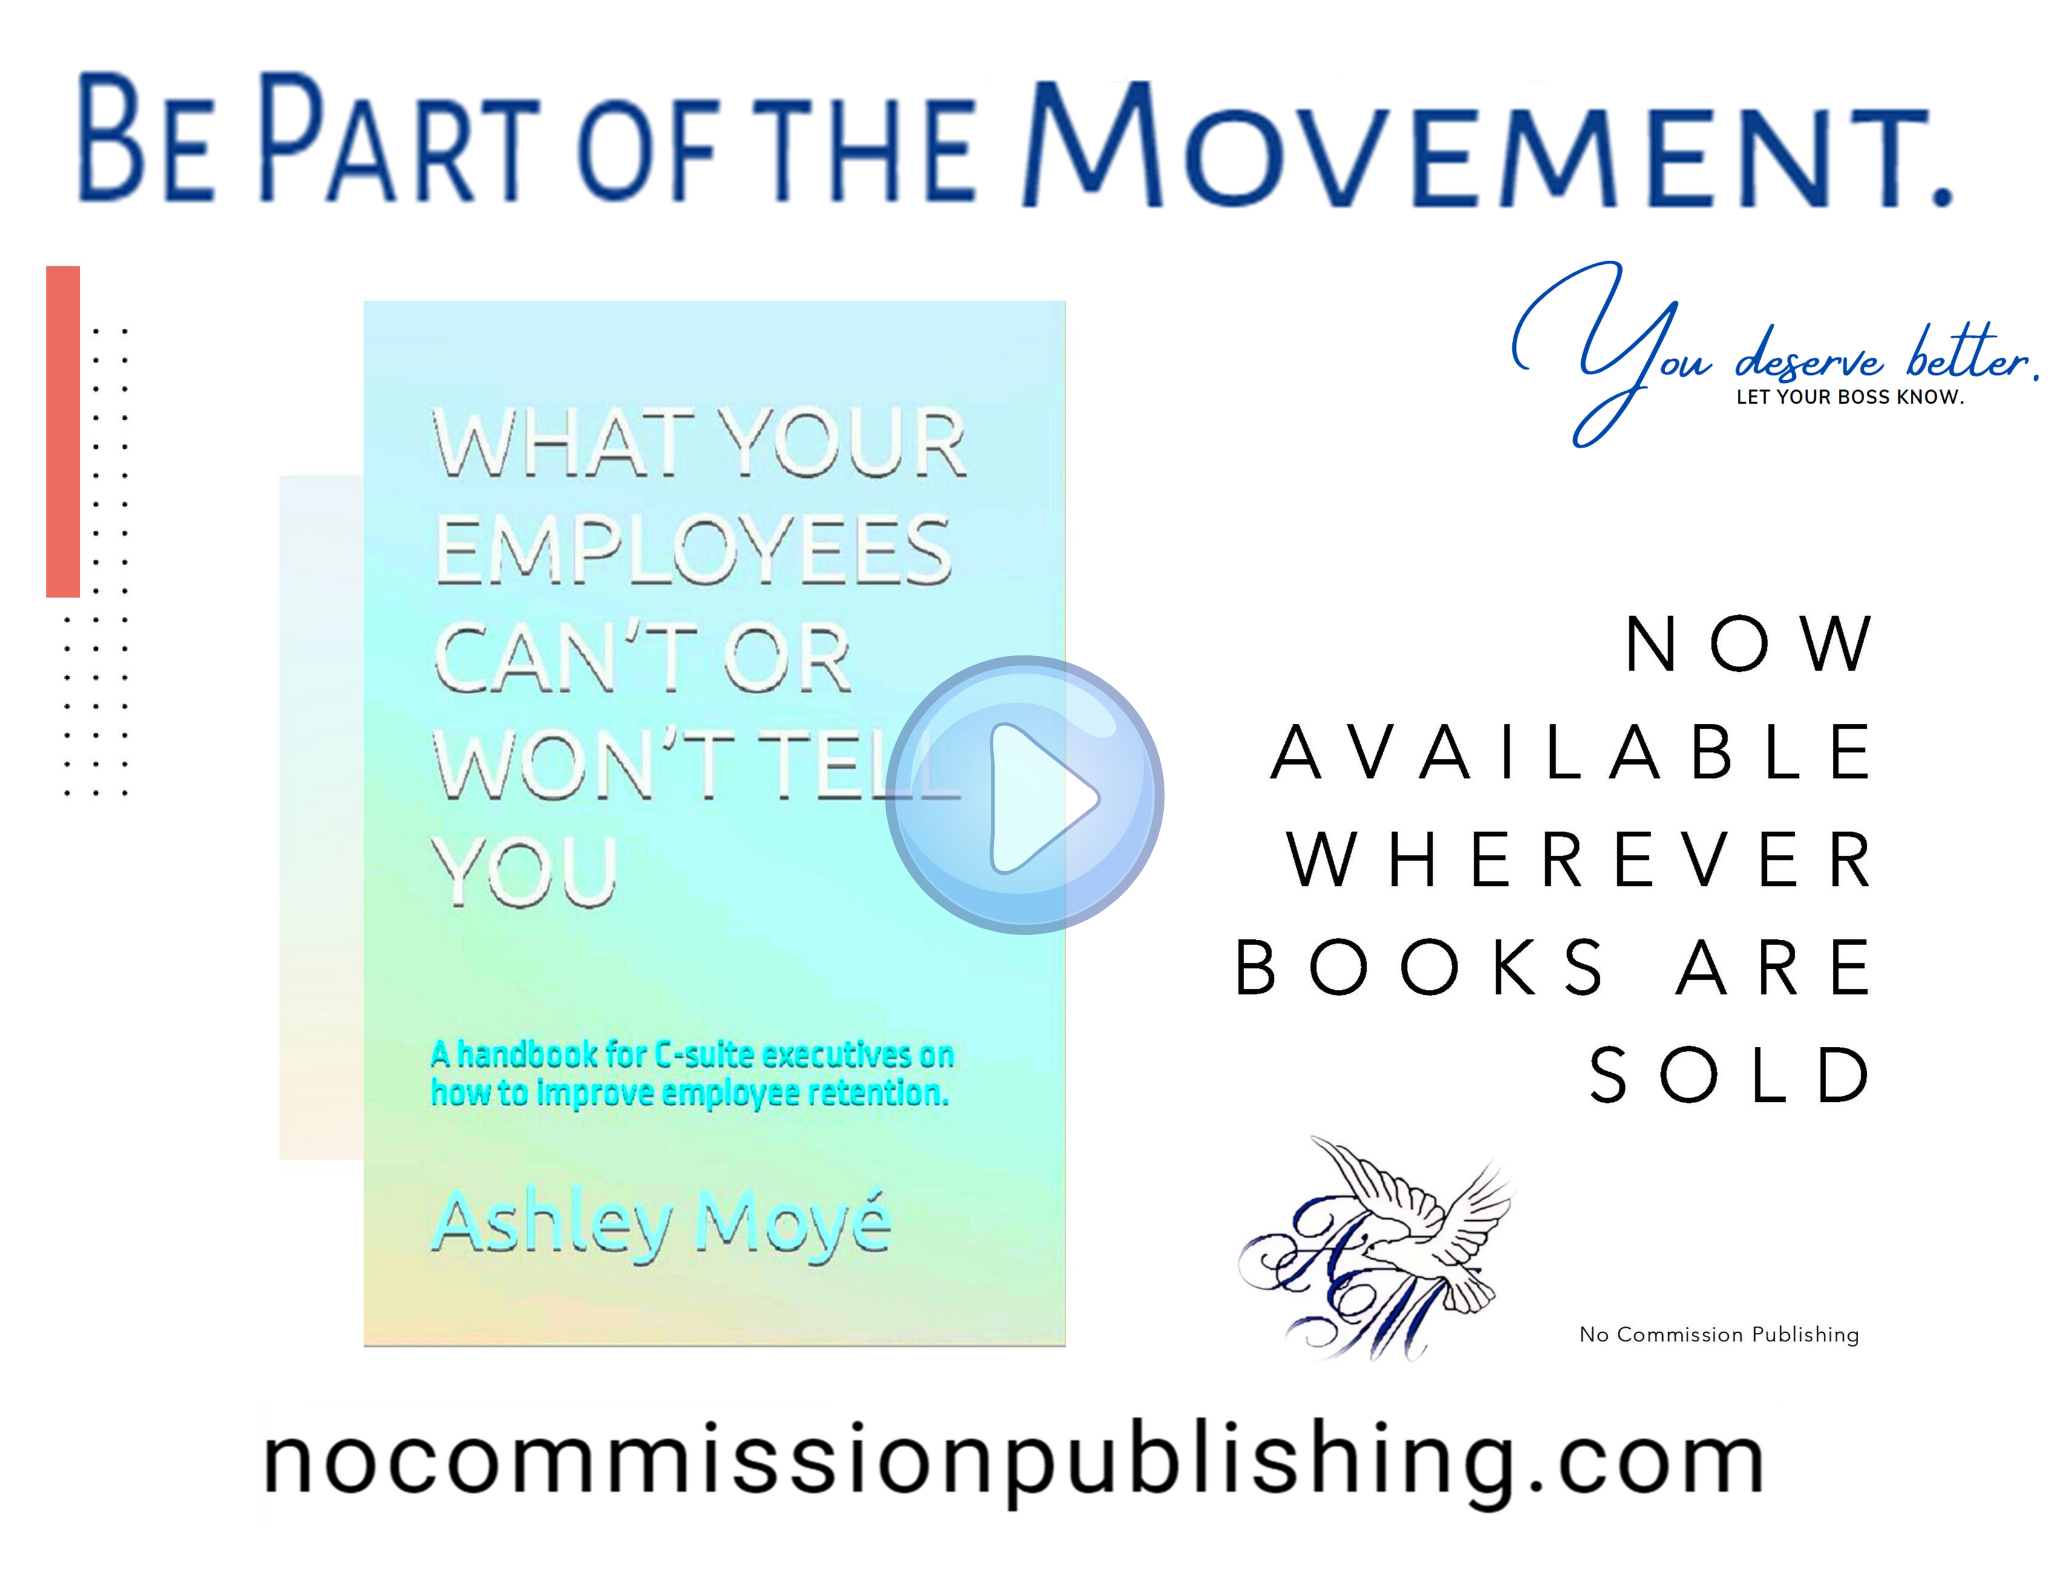 Addressing Economic Inequality WHAT YOUR EMPLOYEES CAN’T OR WON’T TELL YOU: A handbook for C-suite executives on how to improve employee retention. by Ashley Moyé Promo Spot